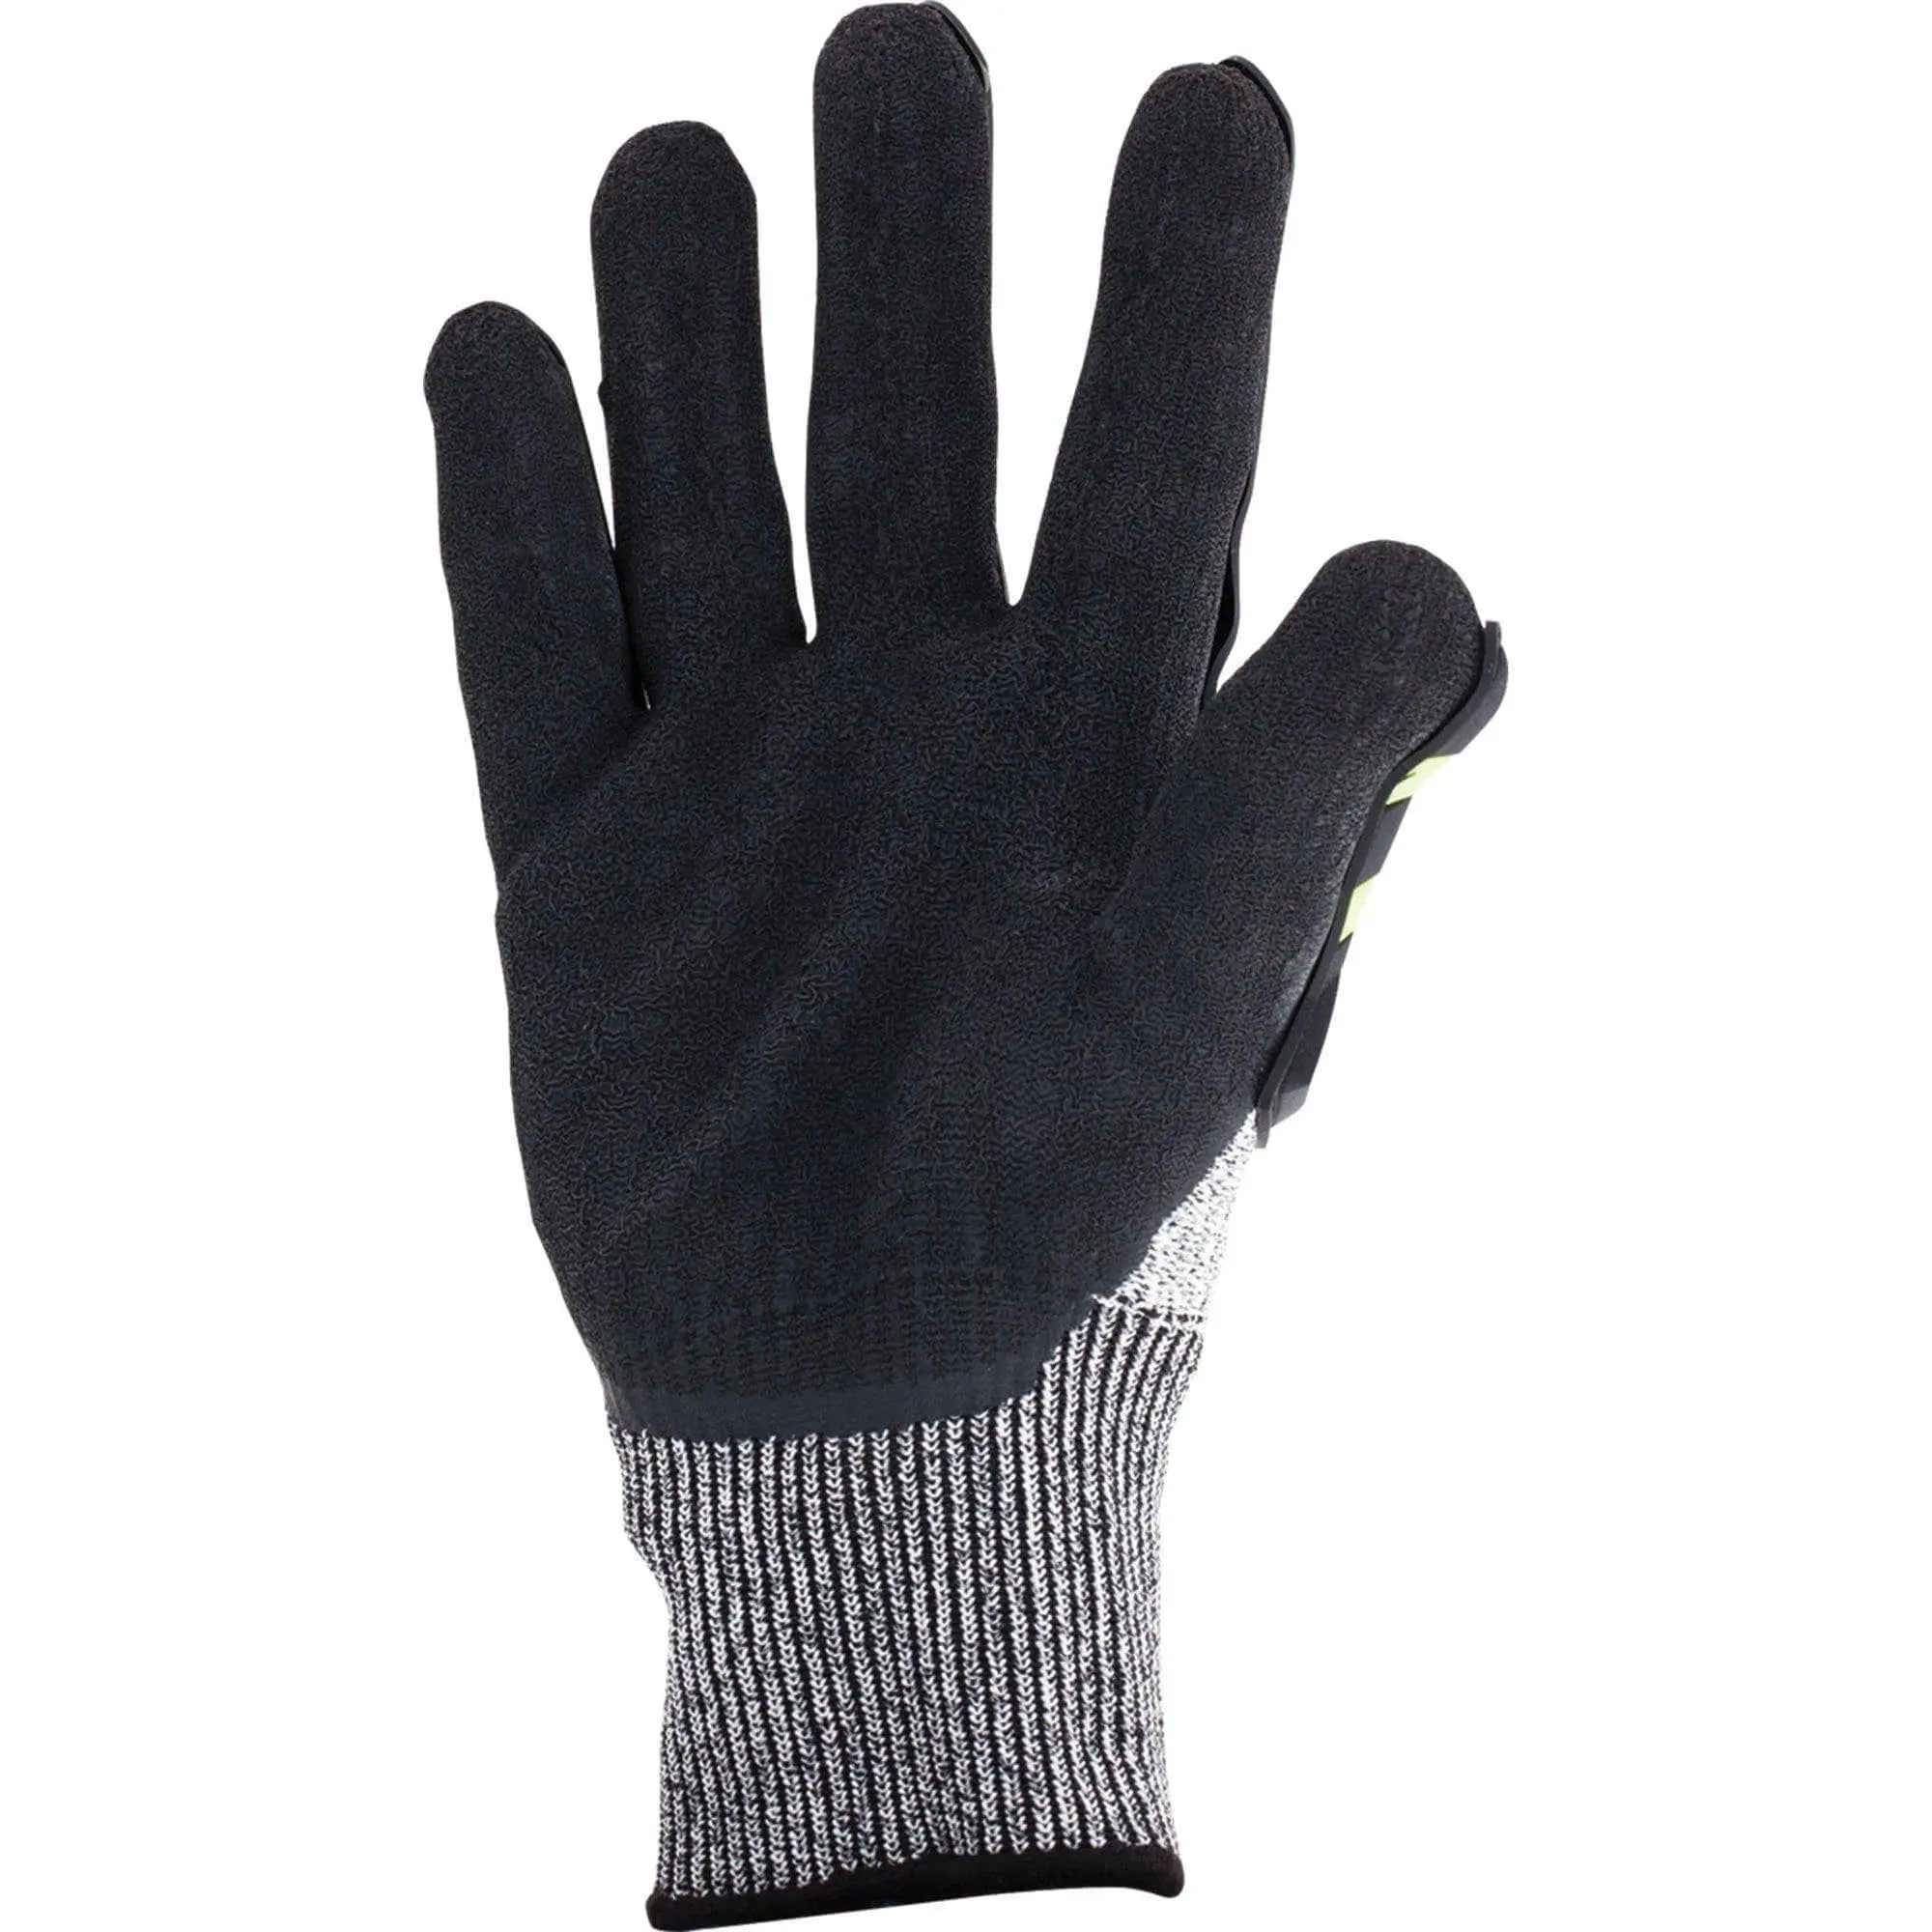 LIFT - Chem 5 Impact Glove - Becker Safety and Supply